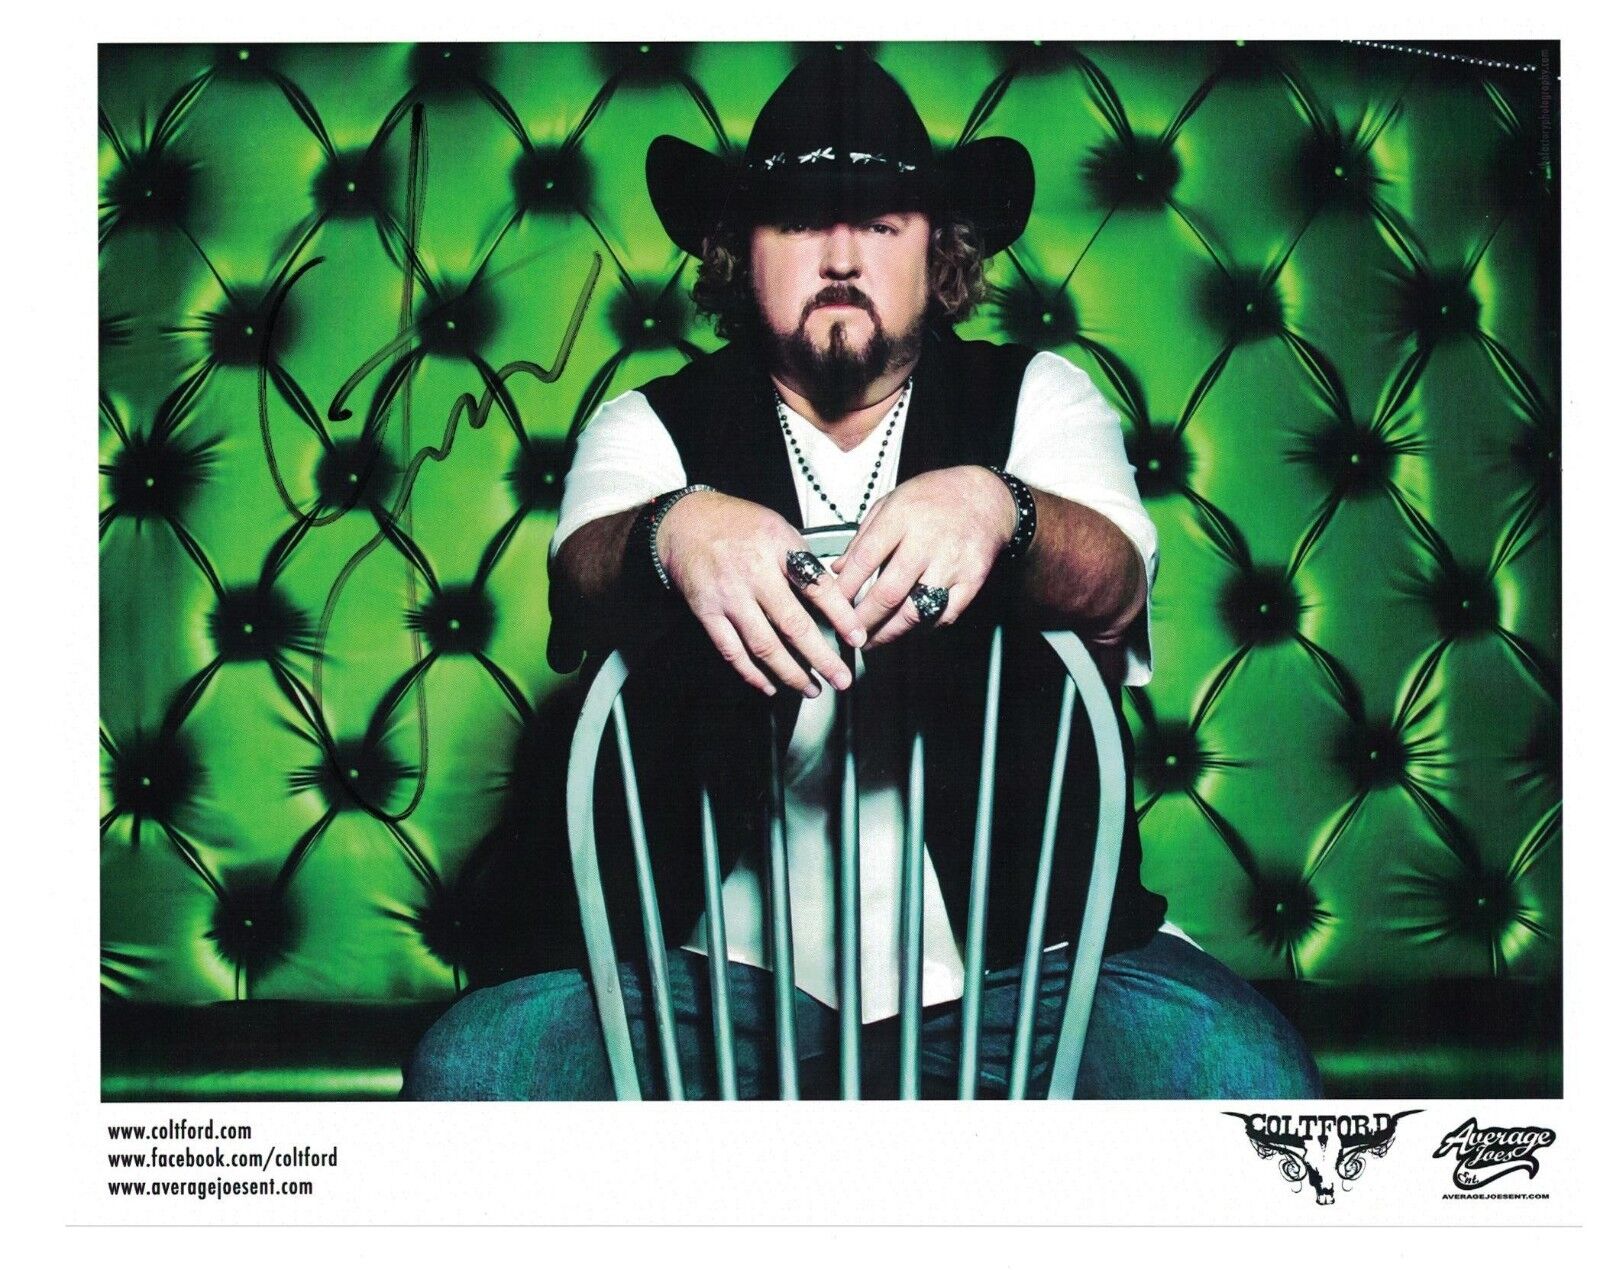 Colt Ford Signed Autographed 8x10 Photo Poster painting Country Music Singer Rapper